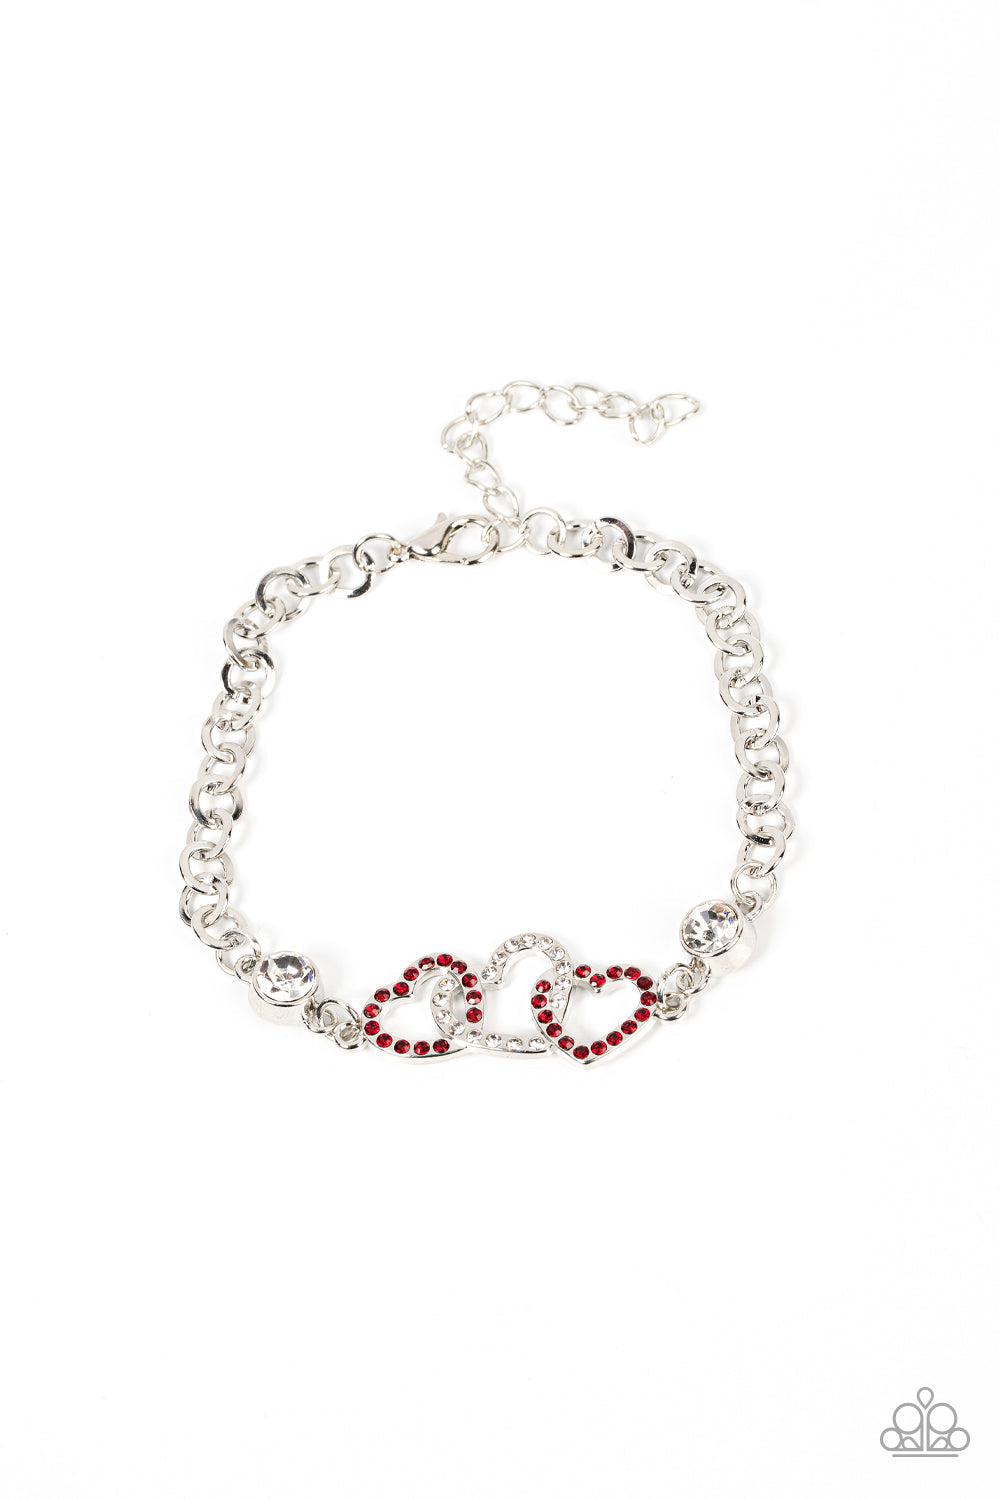 Desirable Dazzle Red and White Rhinestone Heart Bracelet - Paparazzi Accessories- lightbox - CarasShop.com - $5 Jewelry by Cara Jewels